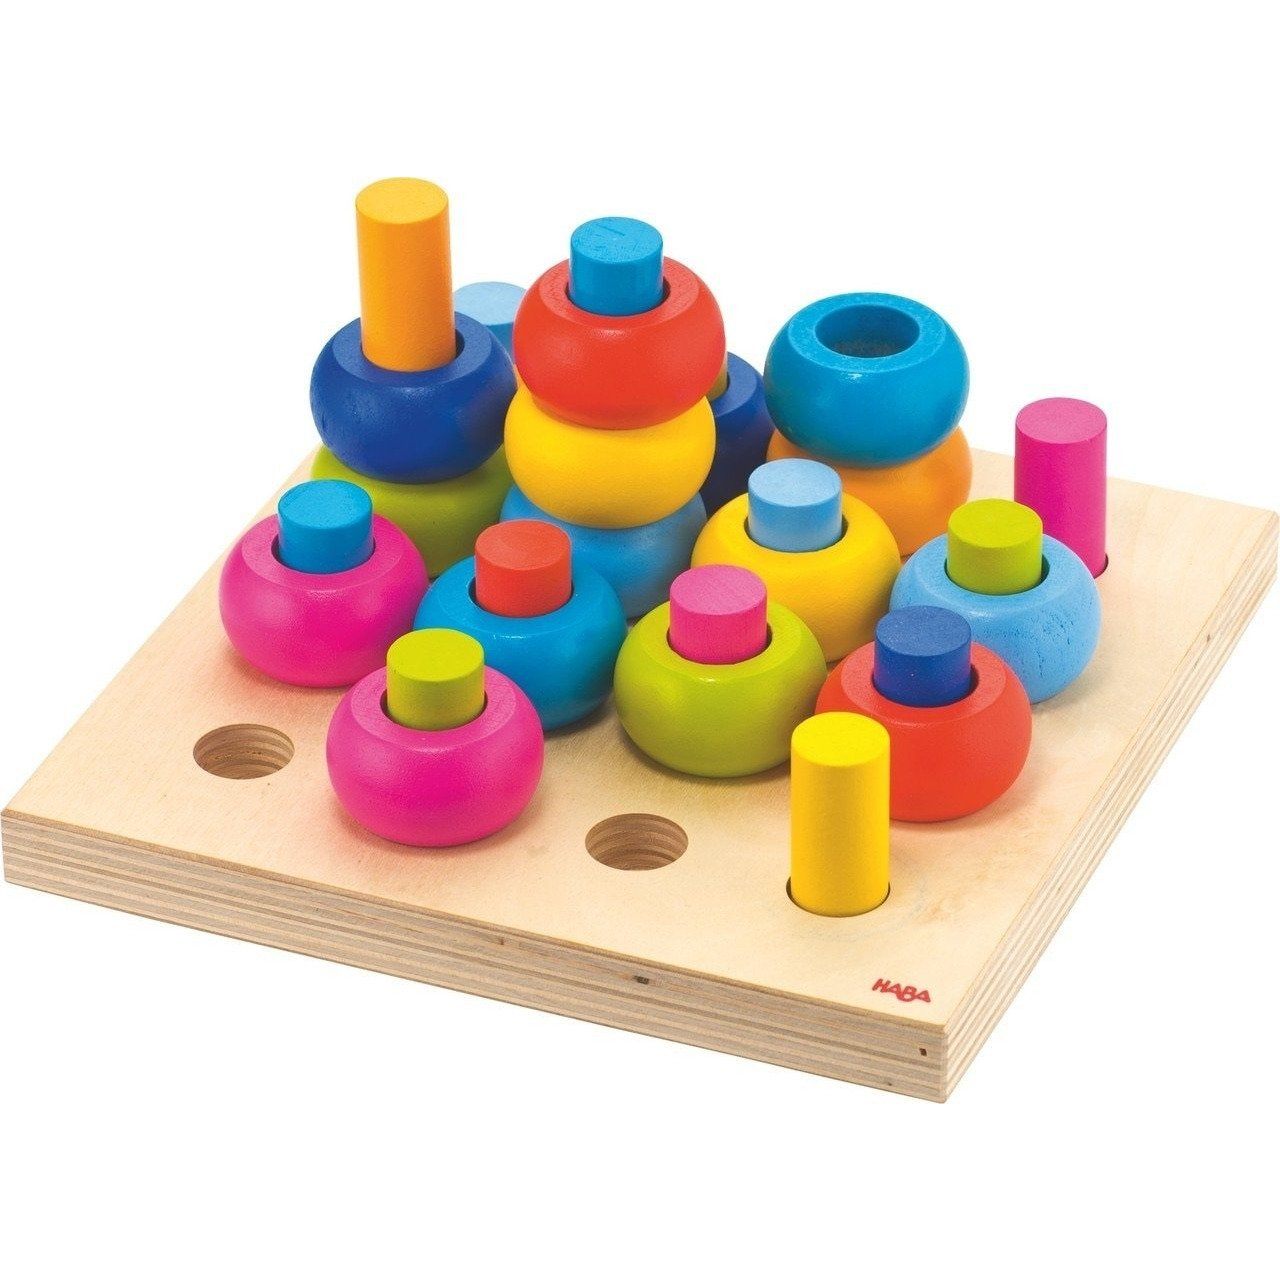 HABA Palette of Pegs | Toddler Toy, Montessori Toy - Alder & Alouette